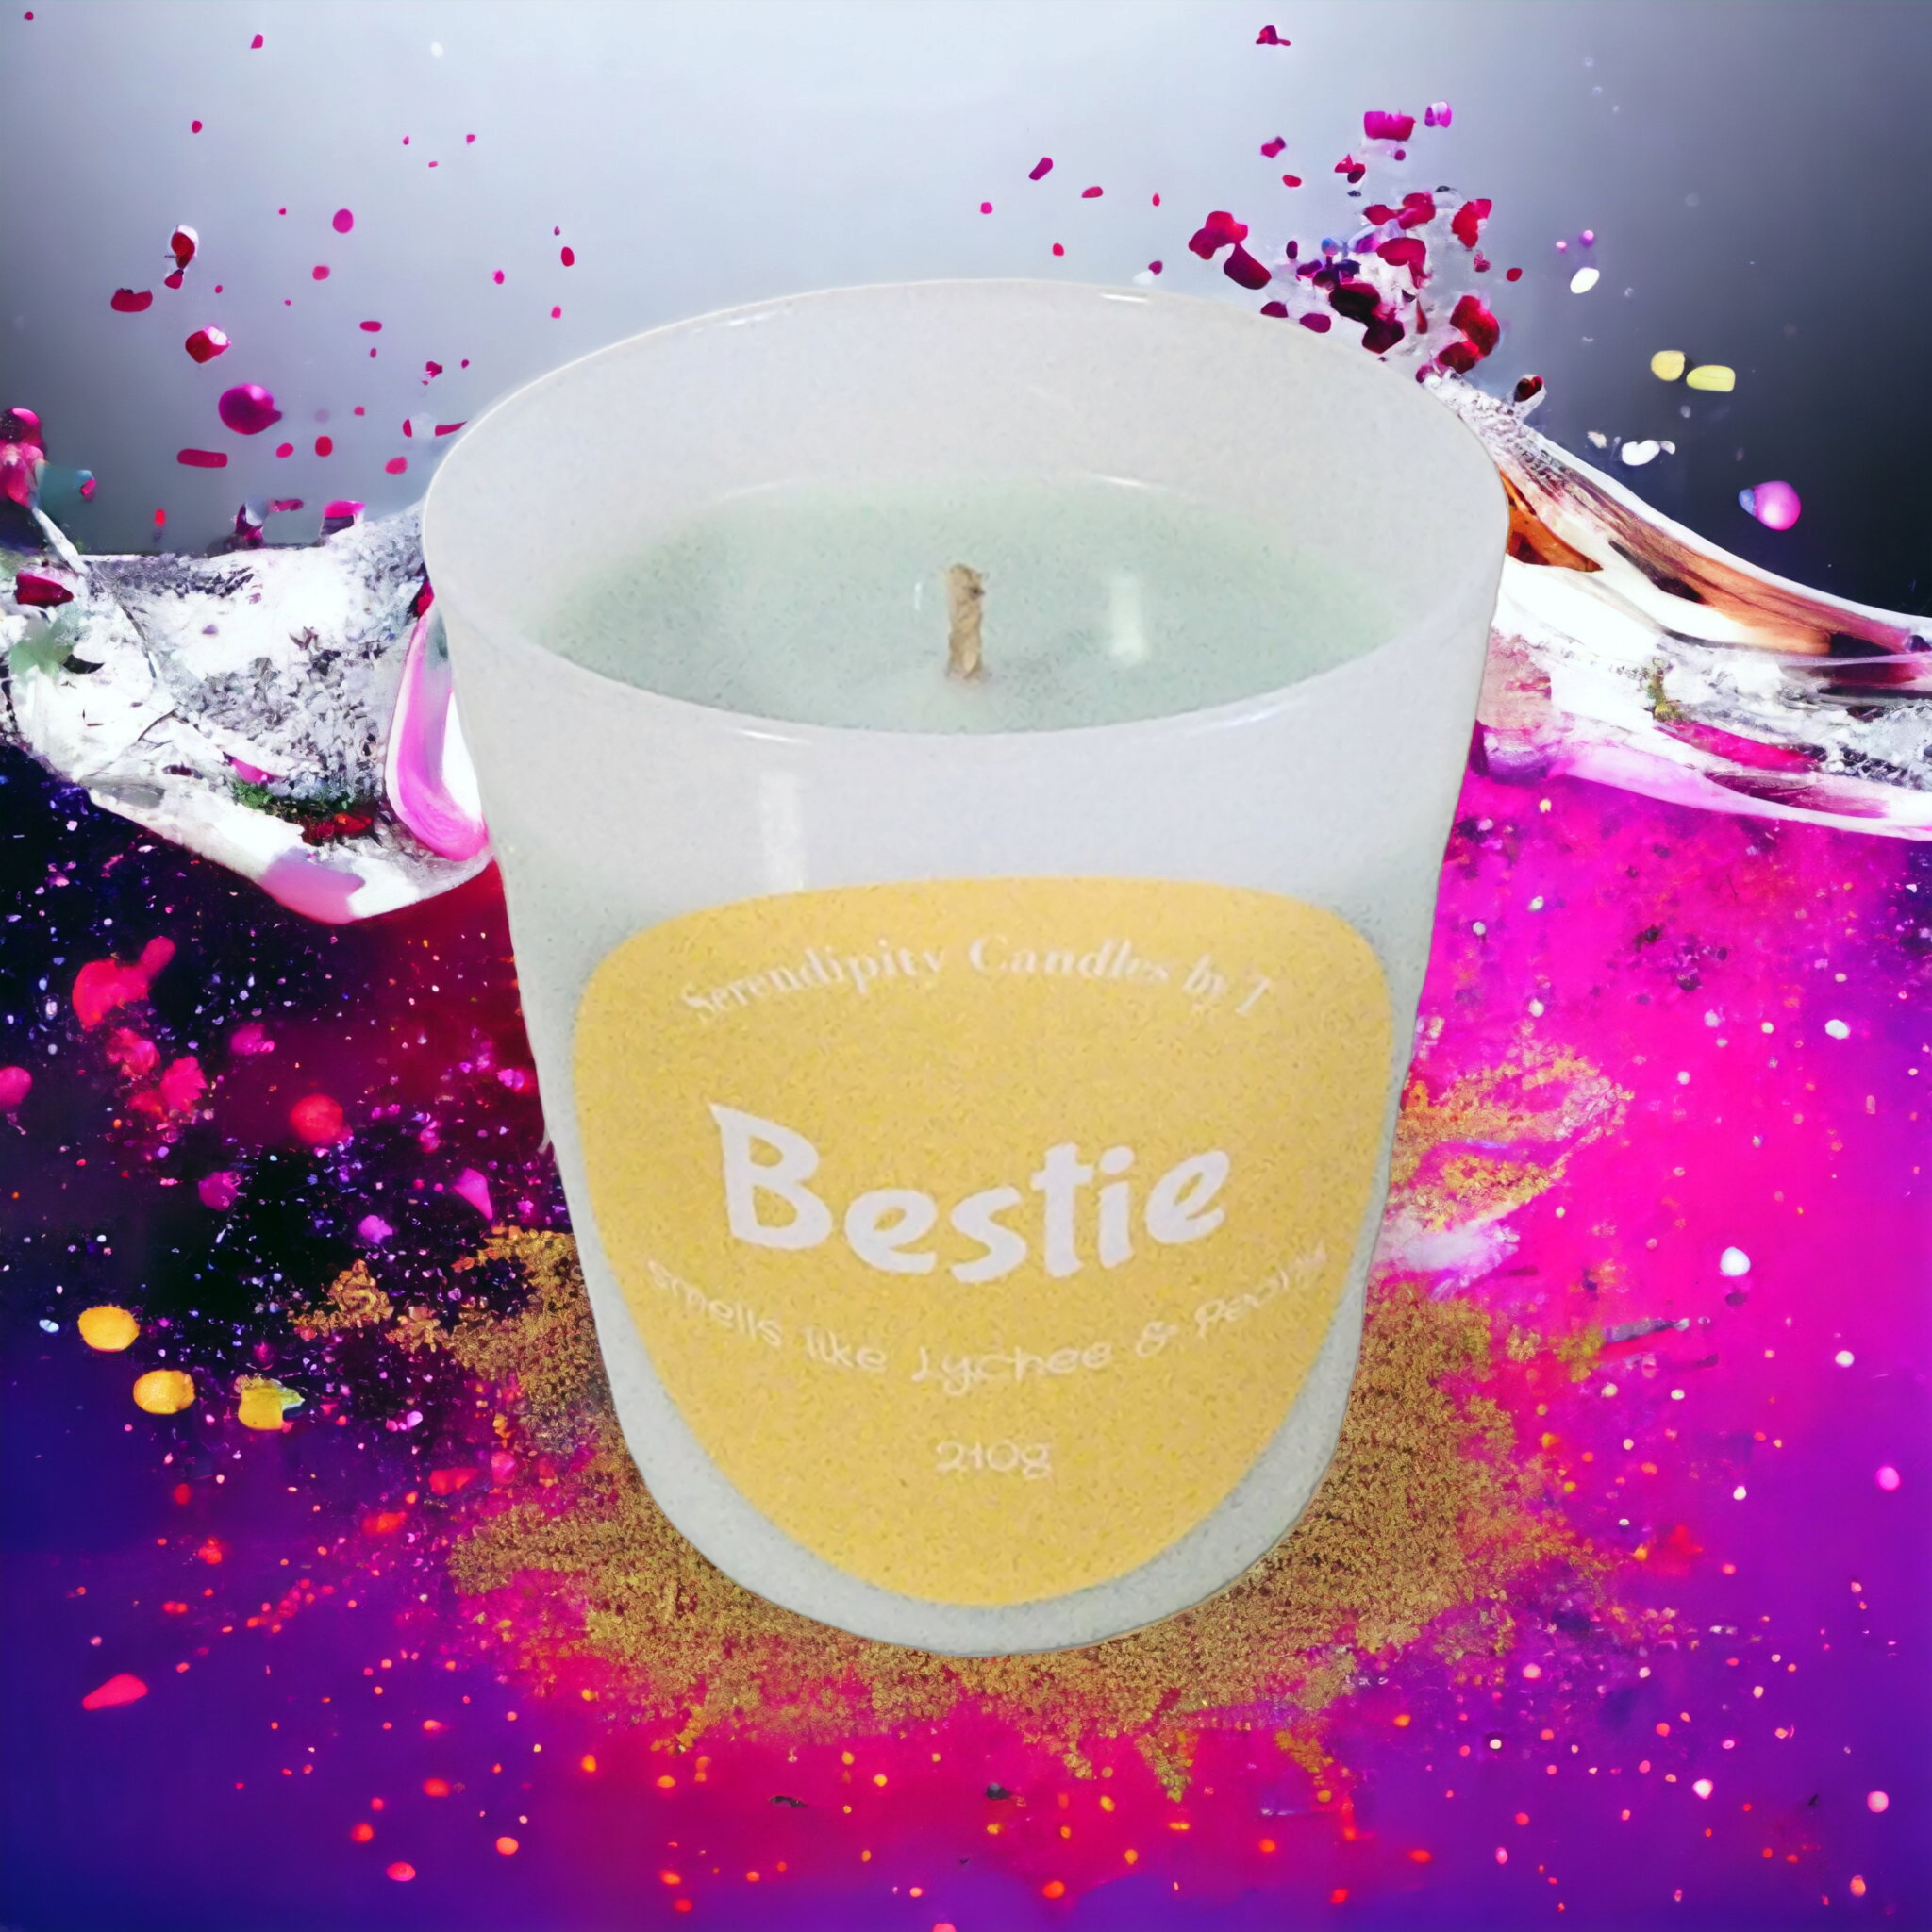 Bestie |Scented Candle On Sale Normally $15 Now $10